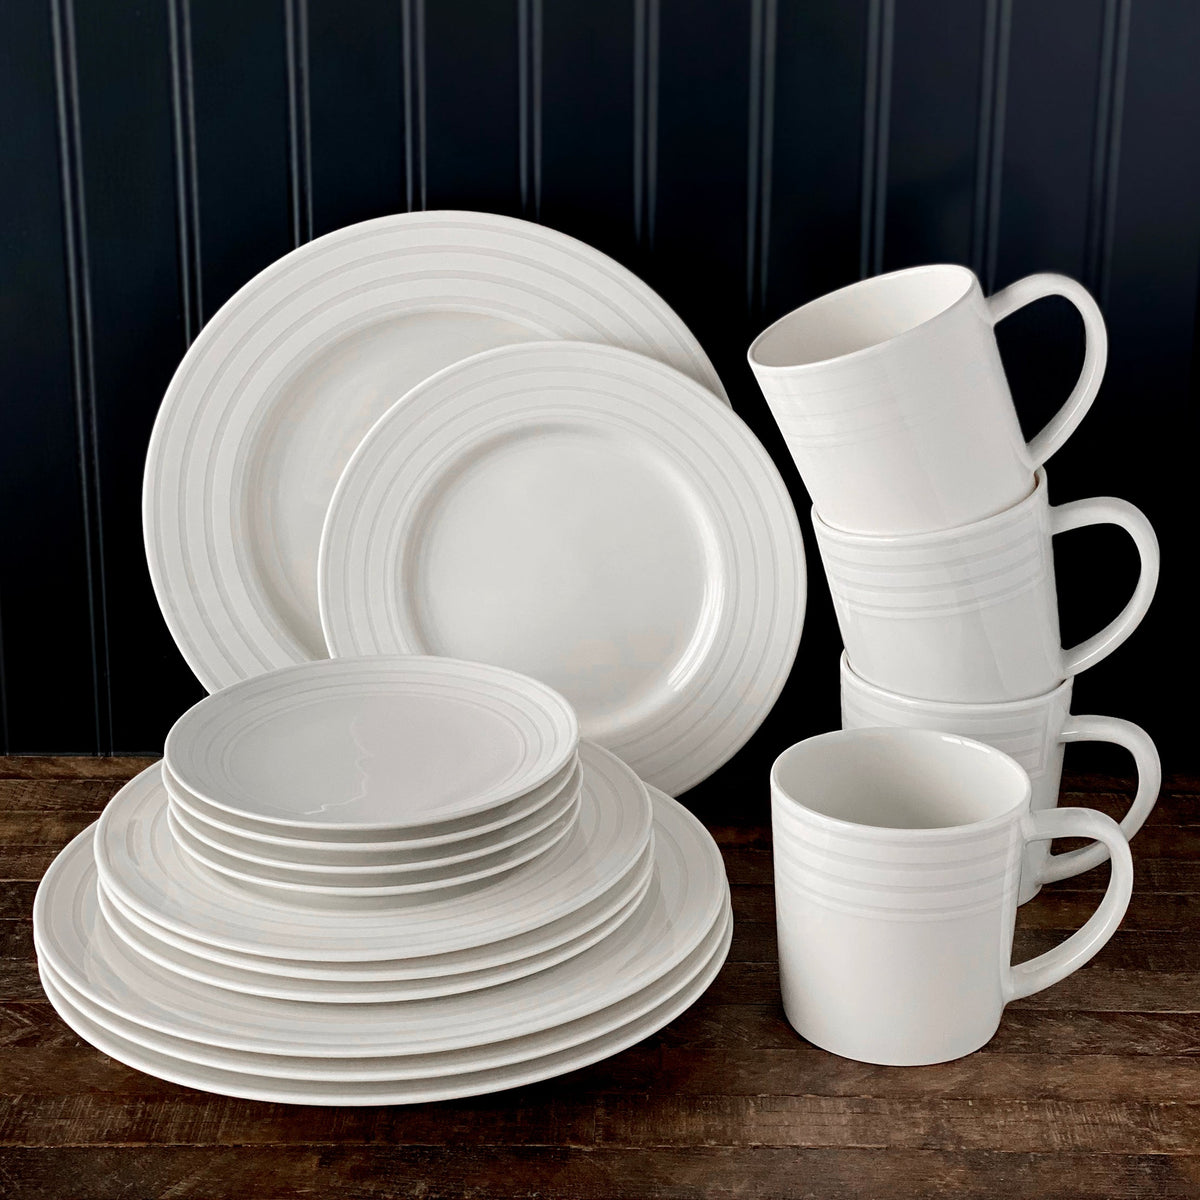 A set of high-fired porcelain dinnerware, featuring Cambridge Stripe Small Plates by Caskata Artisanal Home, bowls, and stacked mugs with a subtle Cambridge Stripe pattern, arranged on a wooden surface against a dark background.